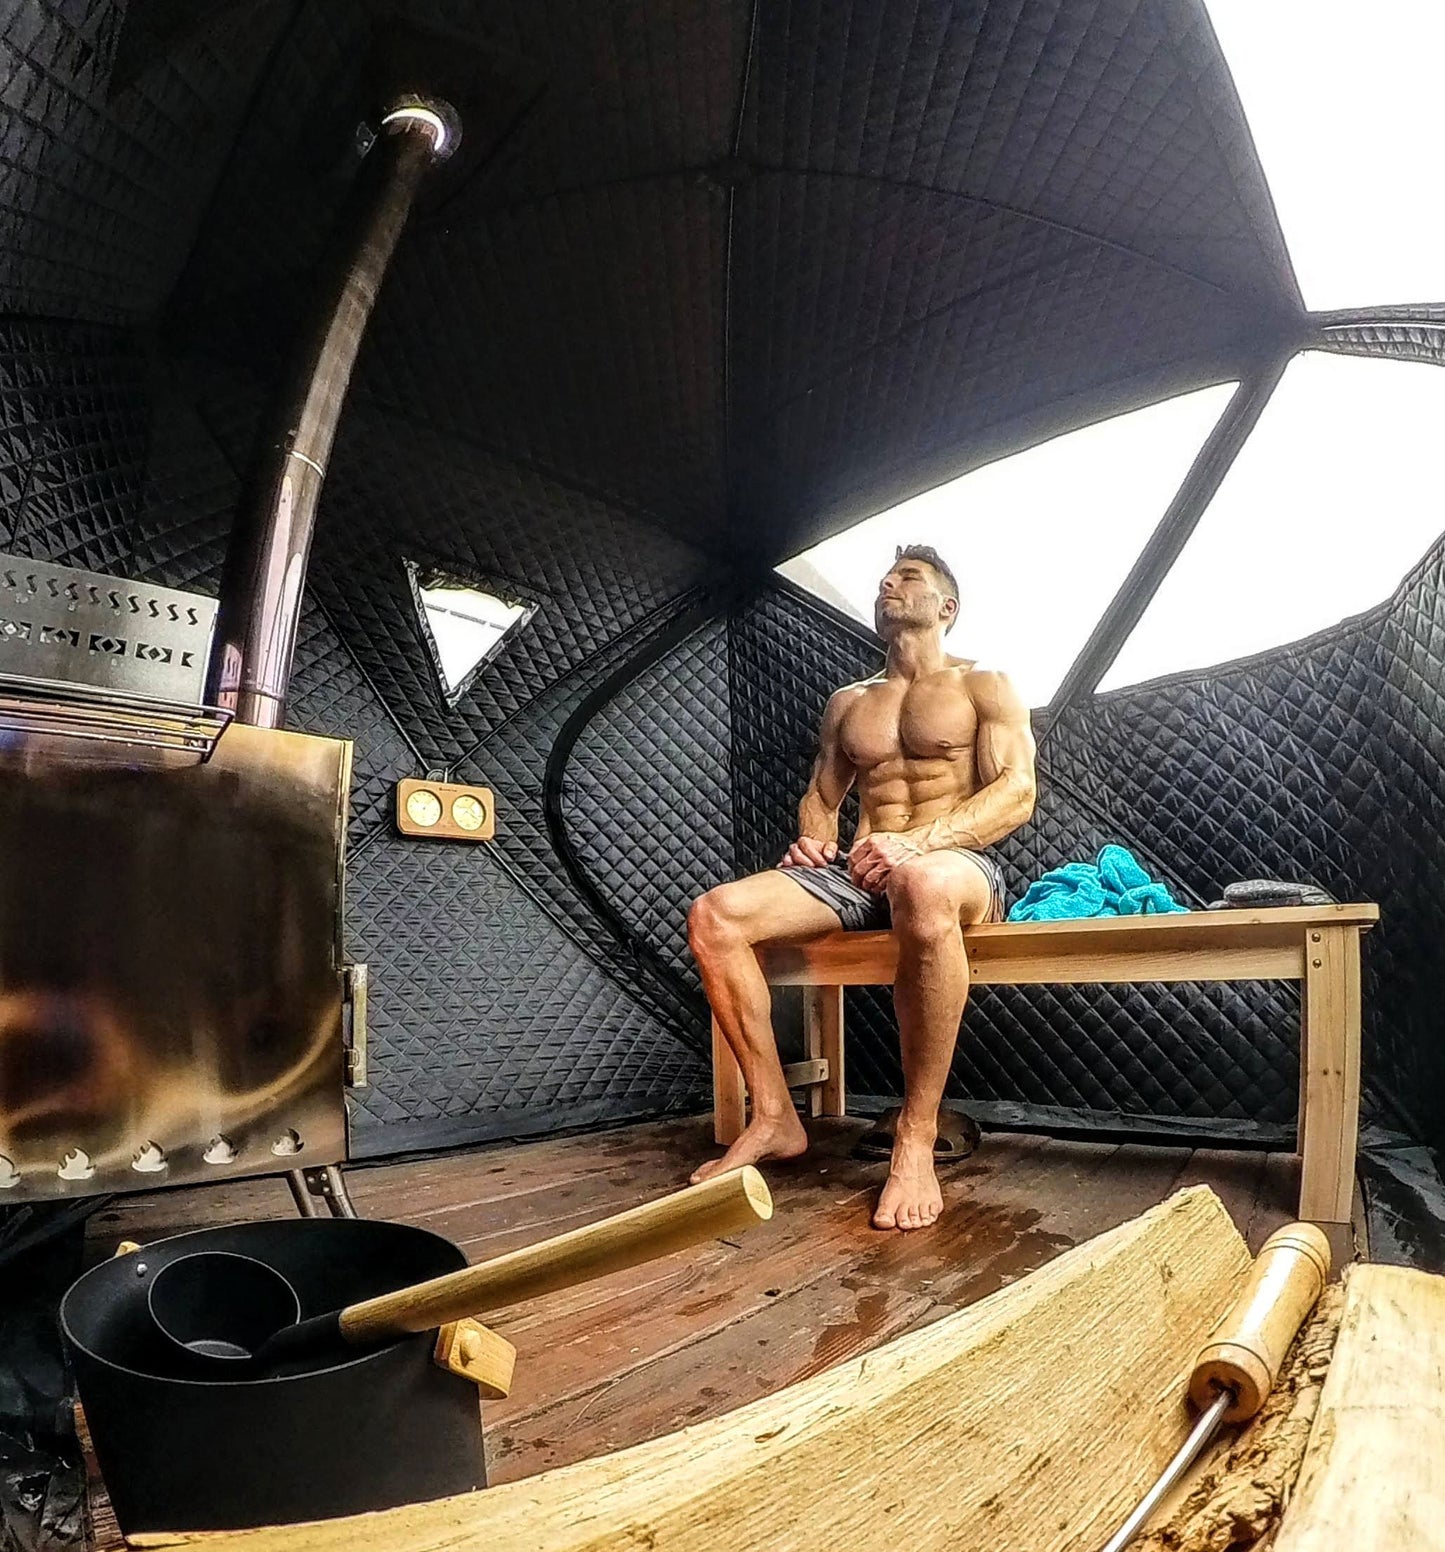 A shirtless man sitting in a Sweat Tent portable sauna with a bucket, ladle and wood stack near the fireplace